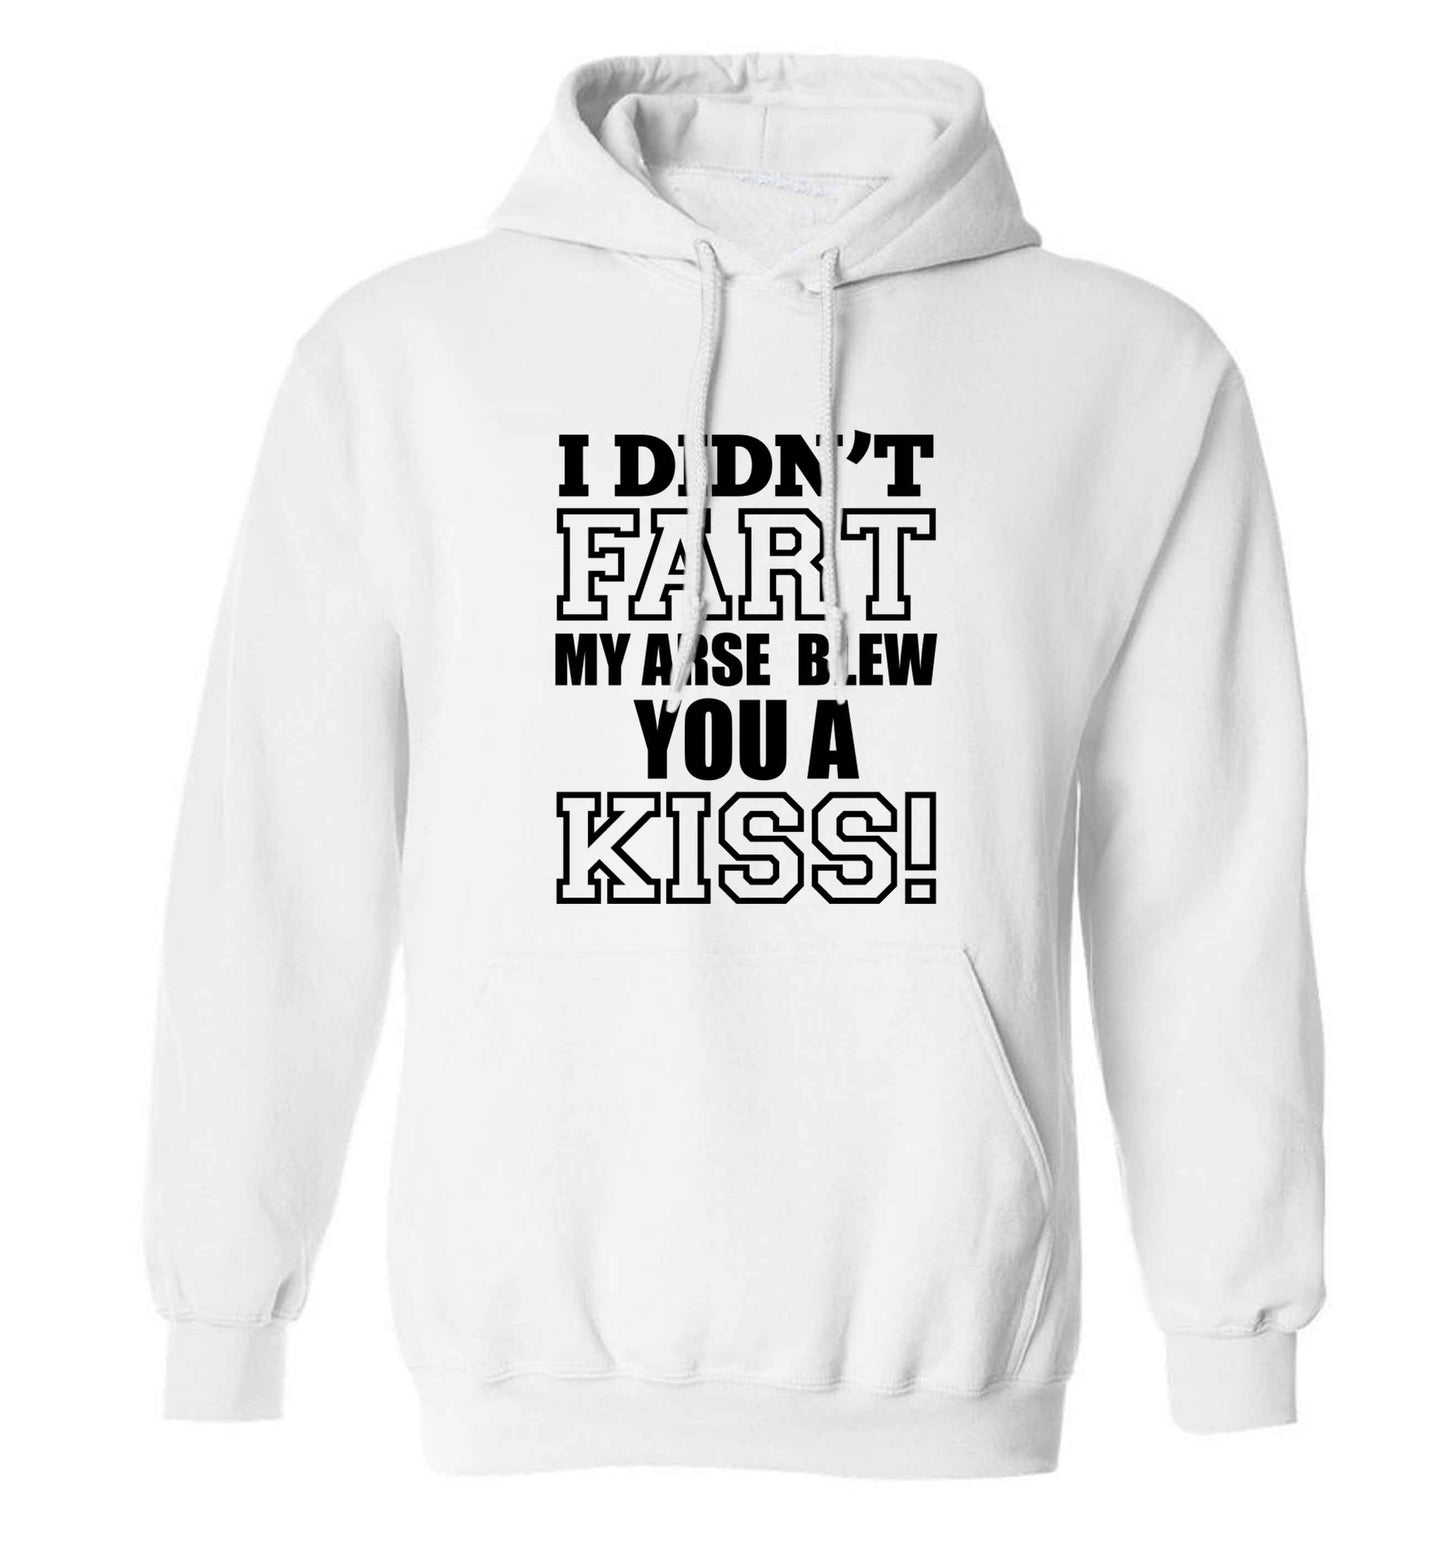 I didn't fart my arse blew you a kiss adults unisex white hoodie 2XL